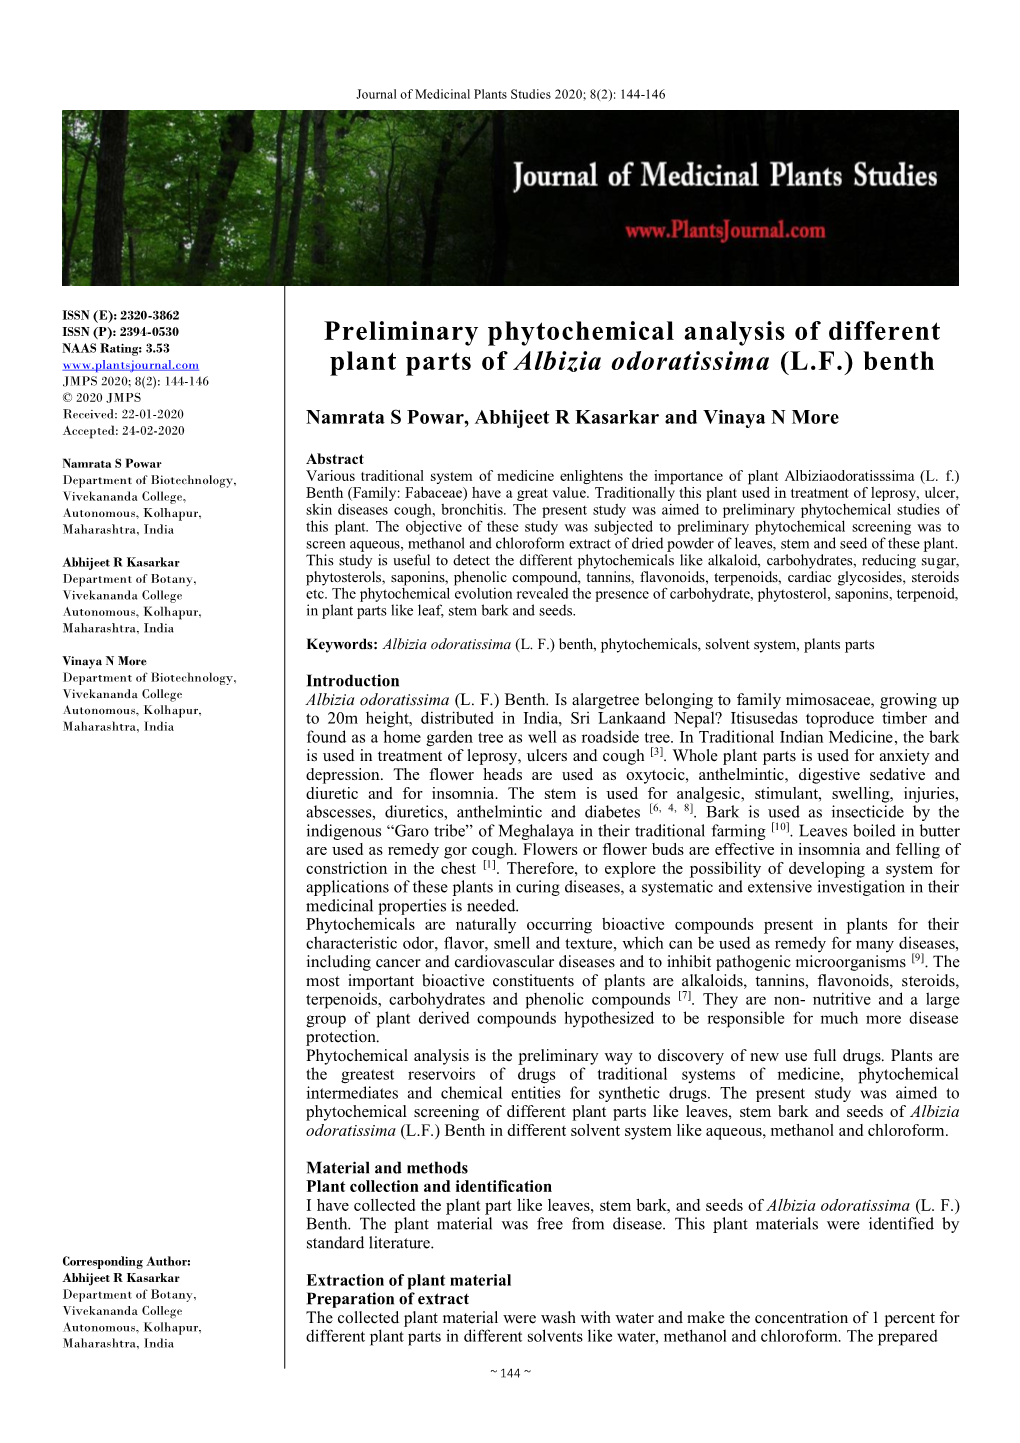 Preliminary Phytochemical Analysis of Different Plant Parts of Albizia